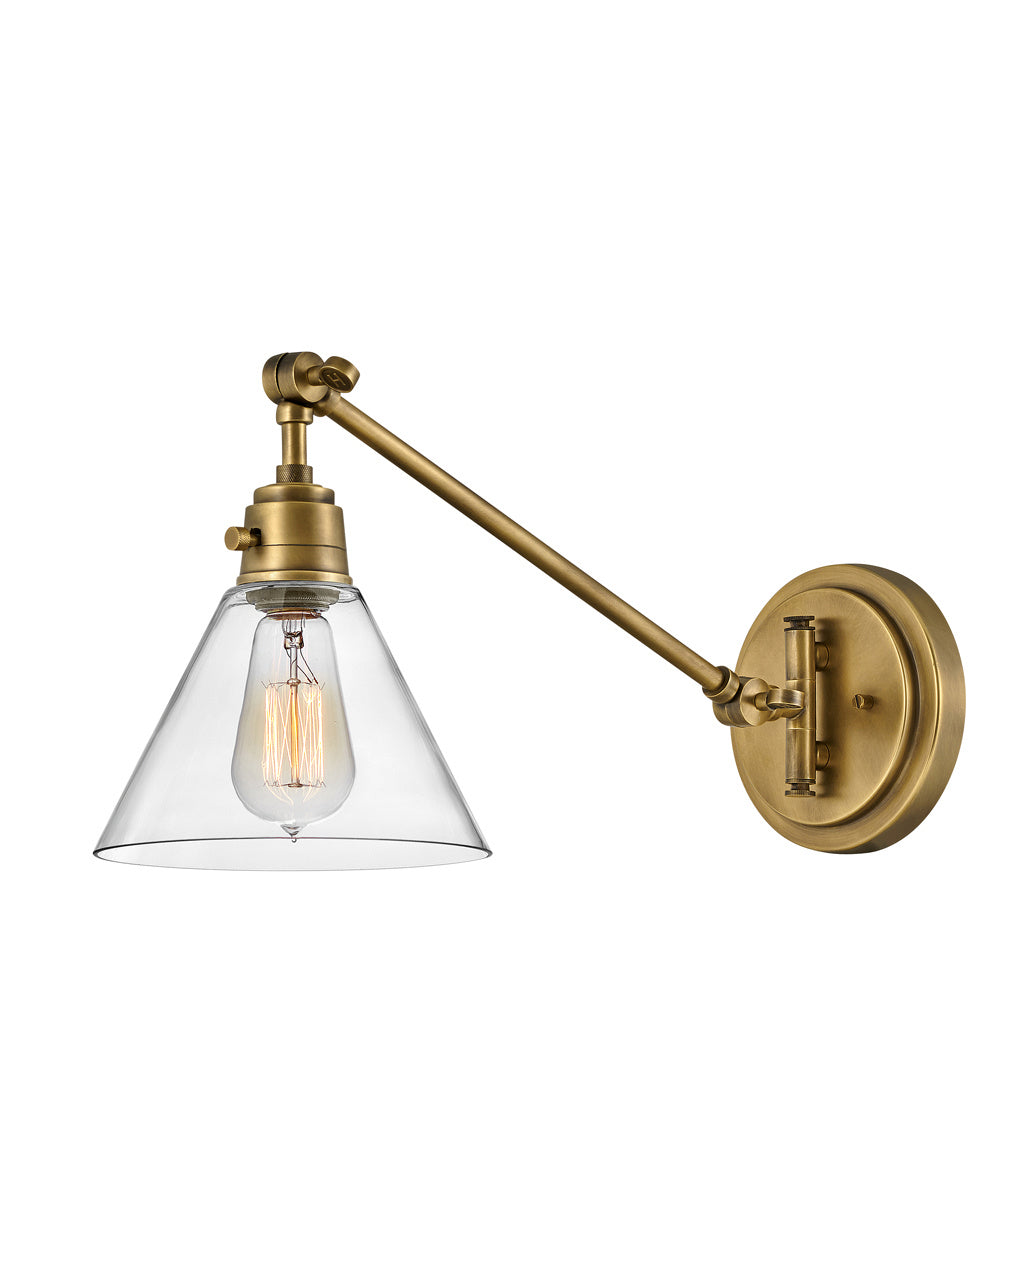 Hinkley Canada - LED Wall Sconce - Arti - Heritage Brass with Clear glass- Union Lighting Luminaires Decor